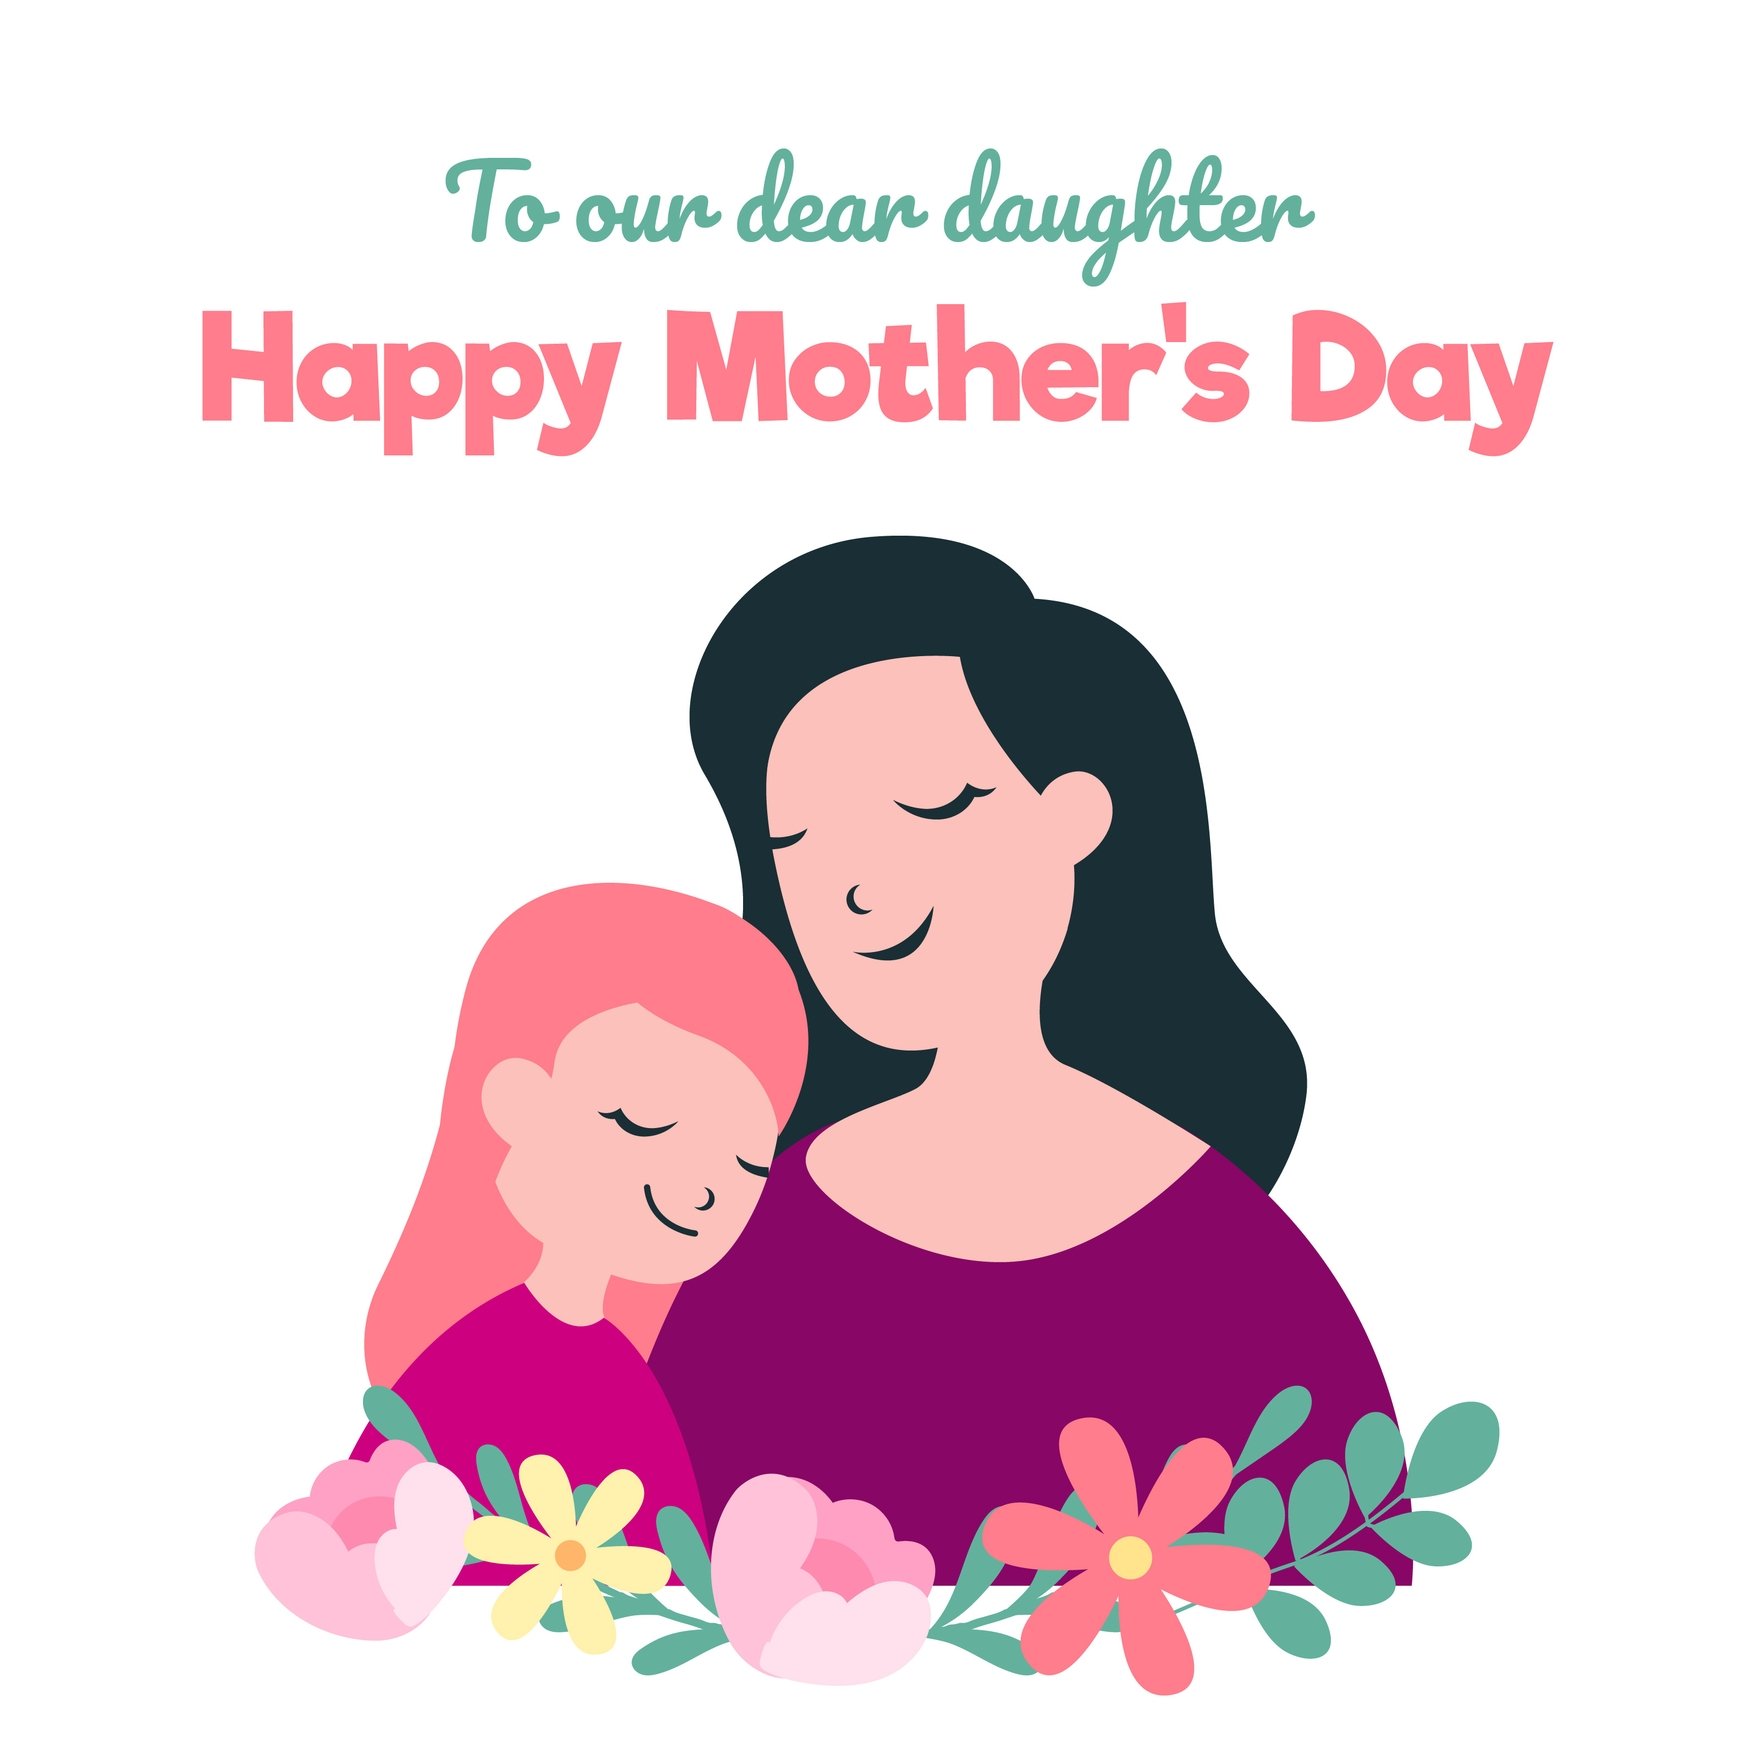 Happy Mother's Day Daughter GIF in Illustrator, EPS, SVG, JPG, GIF, PNG, After Effects